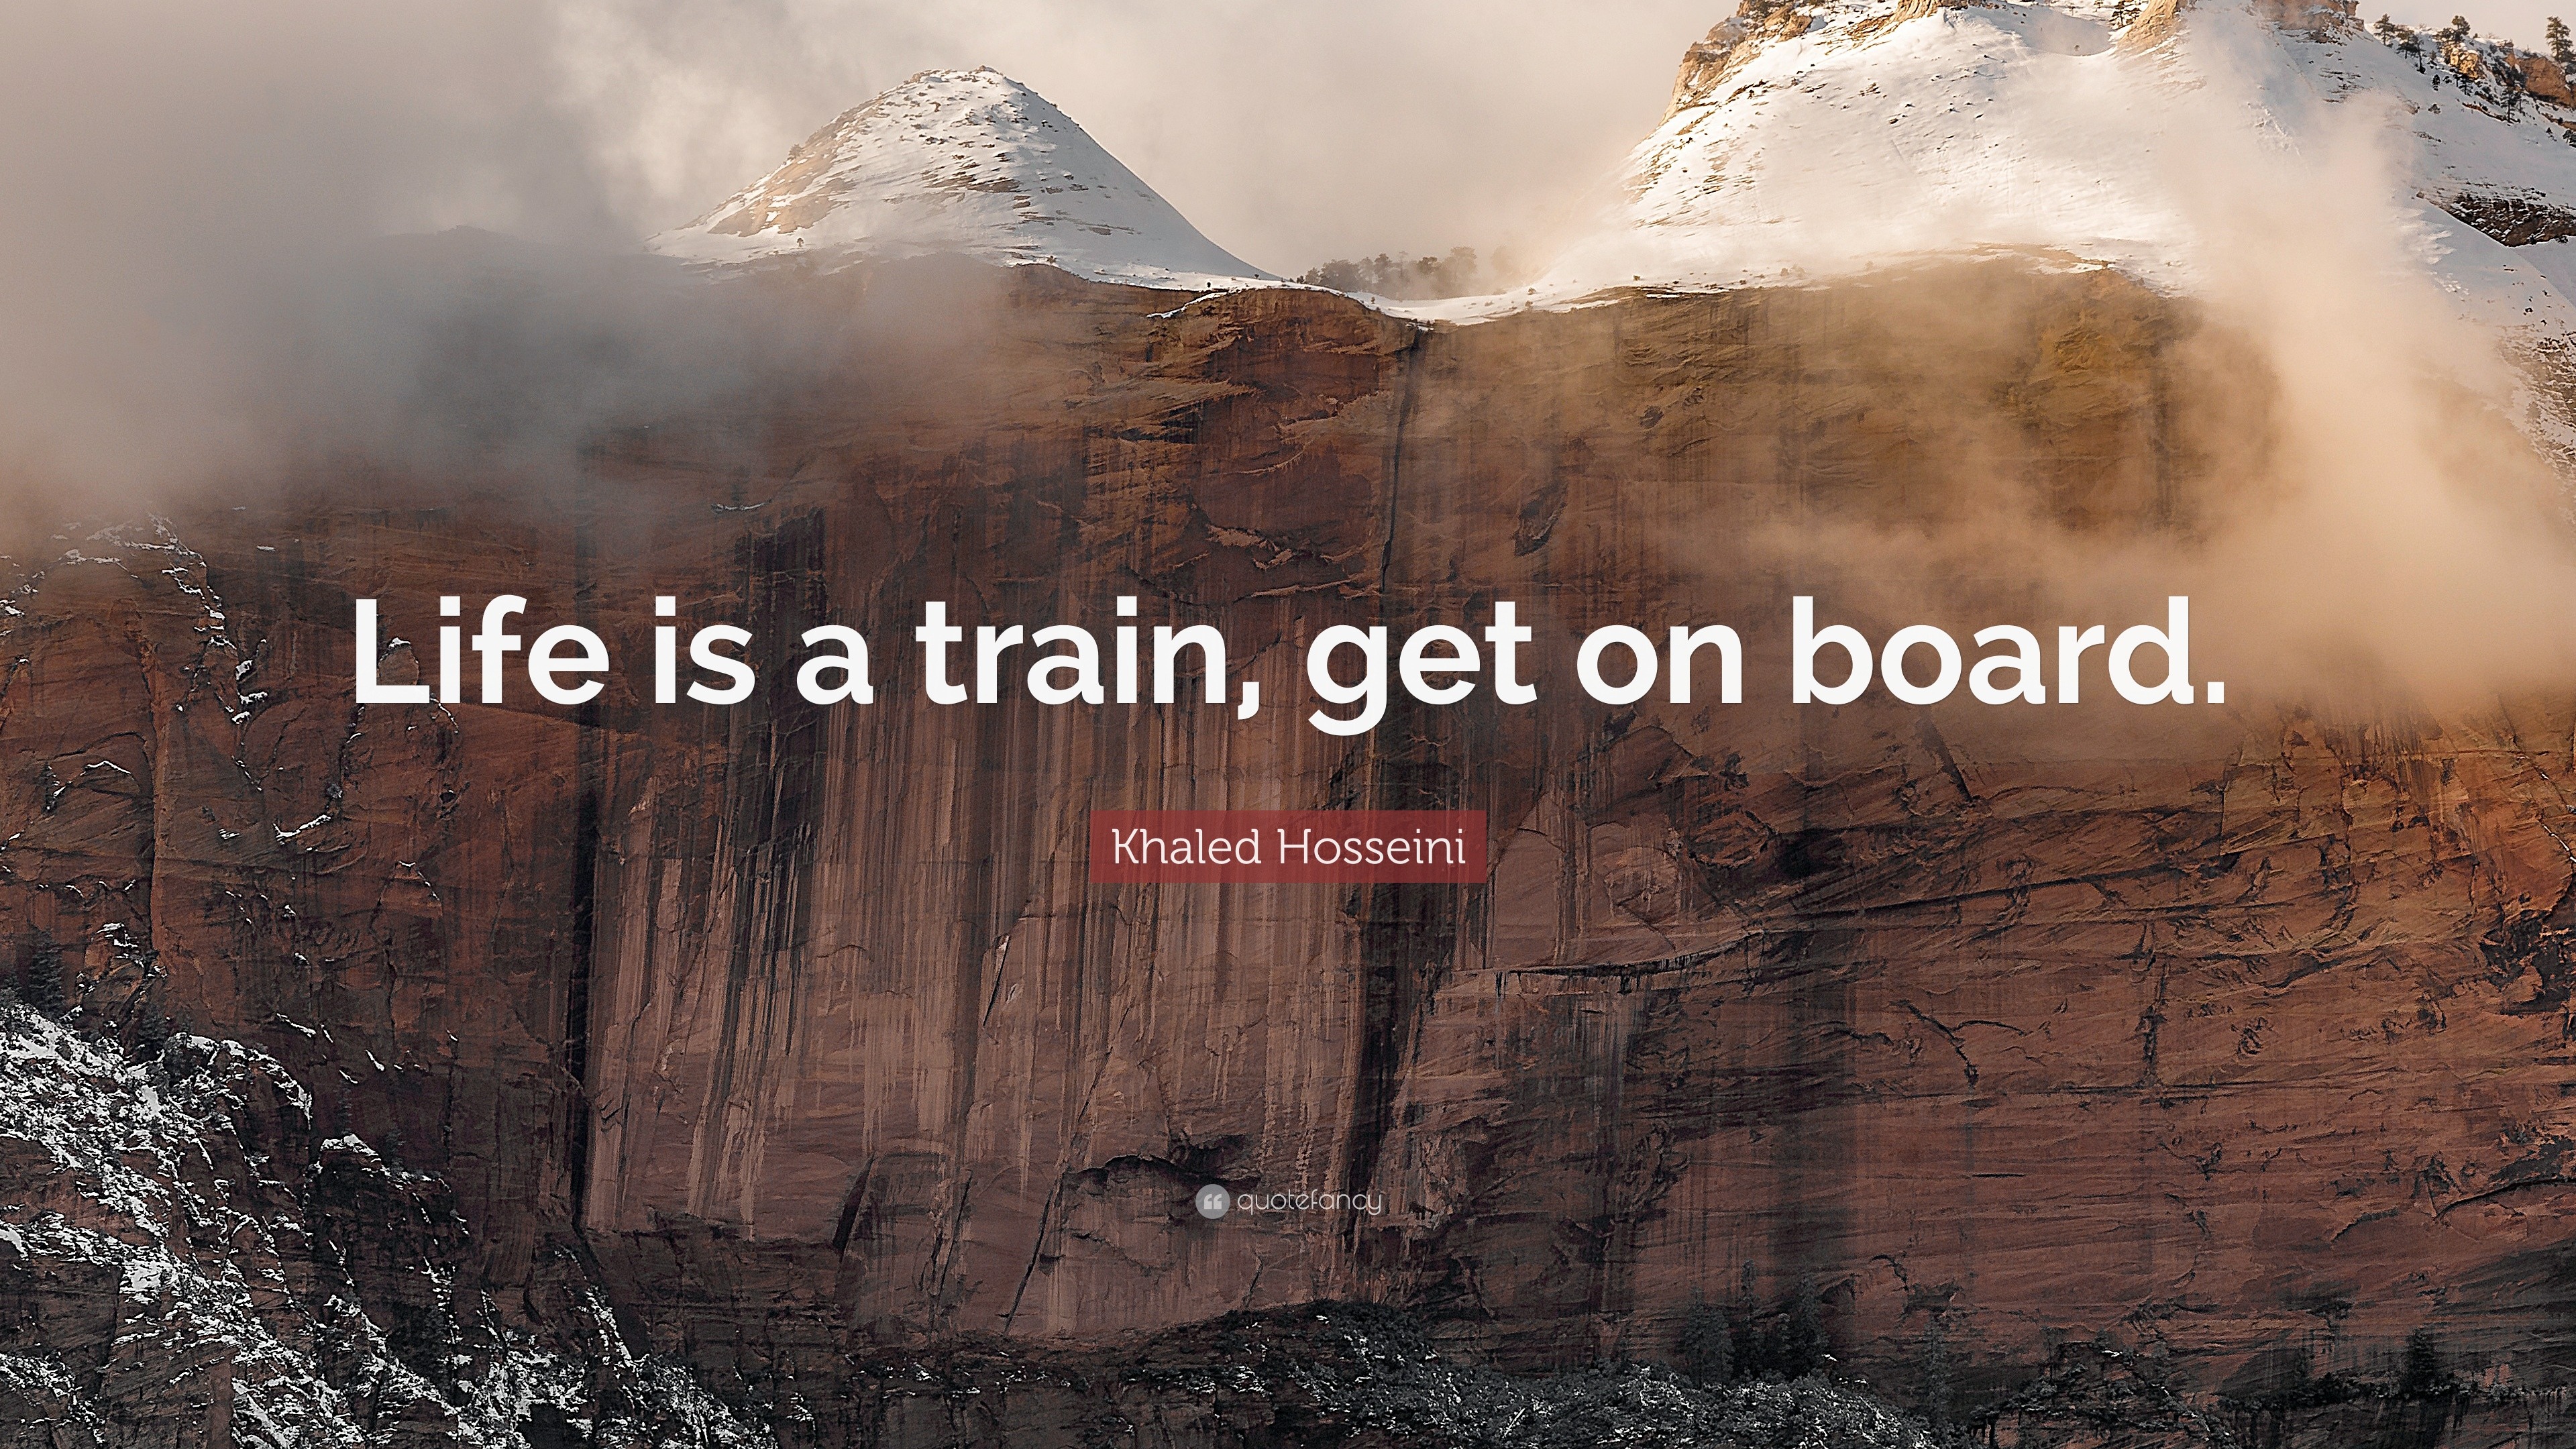 Khaled Hosseini Quote “Life is a train on board ”